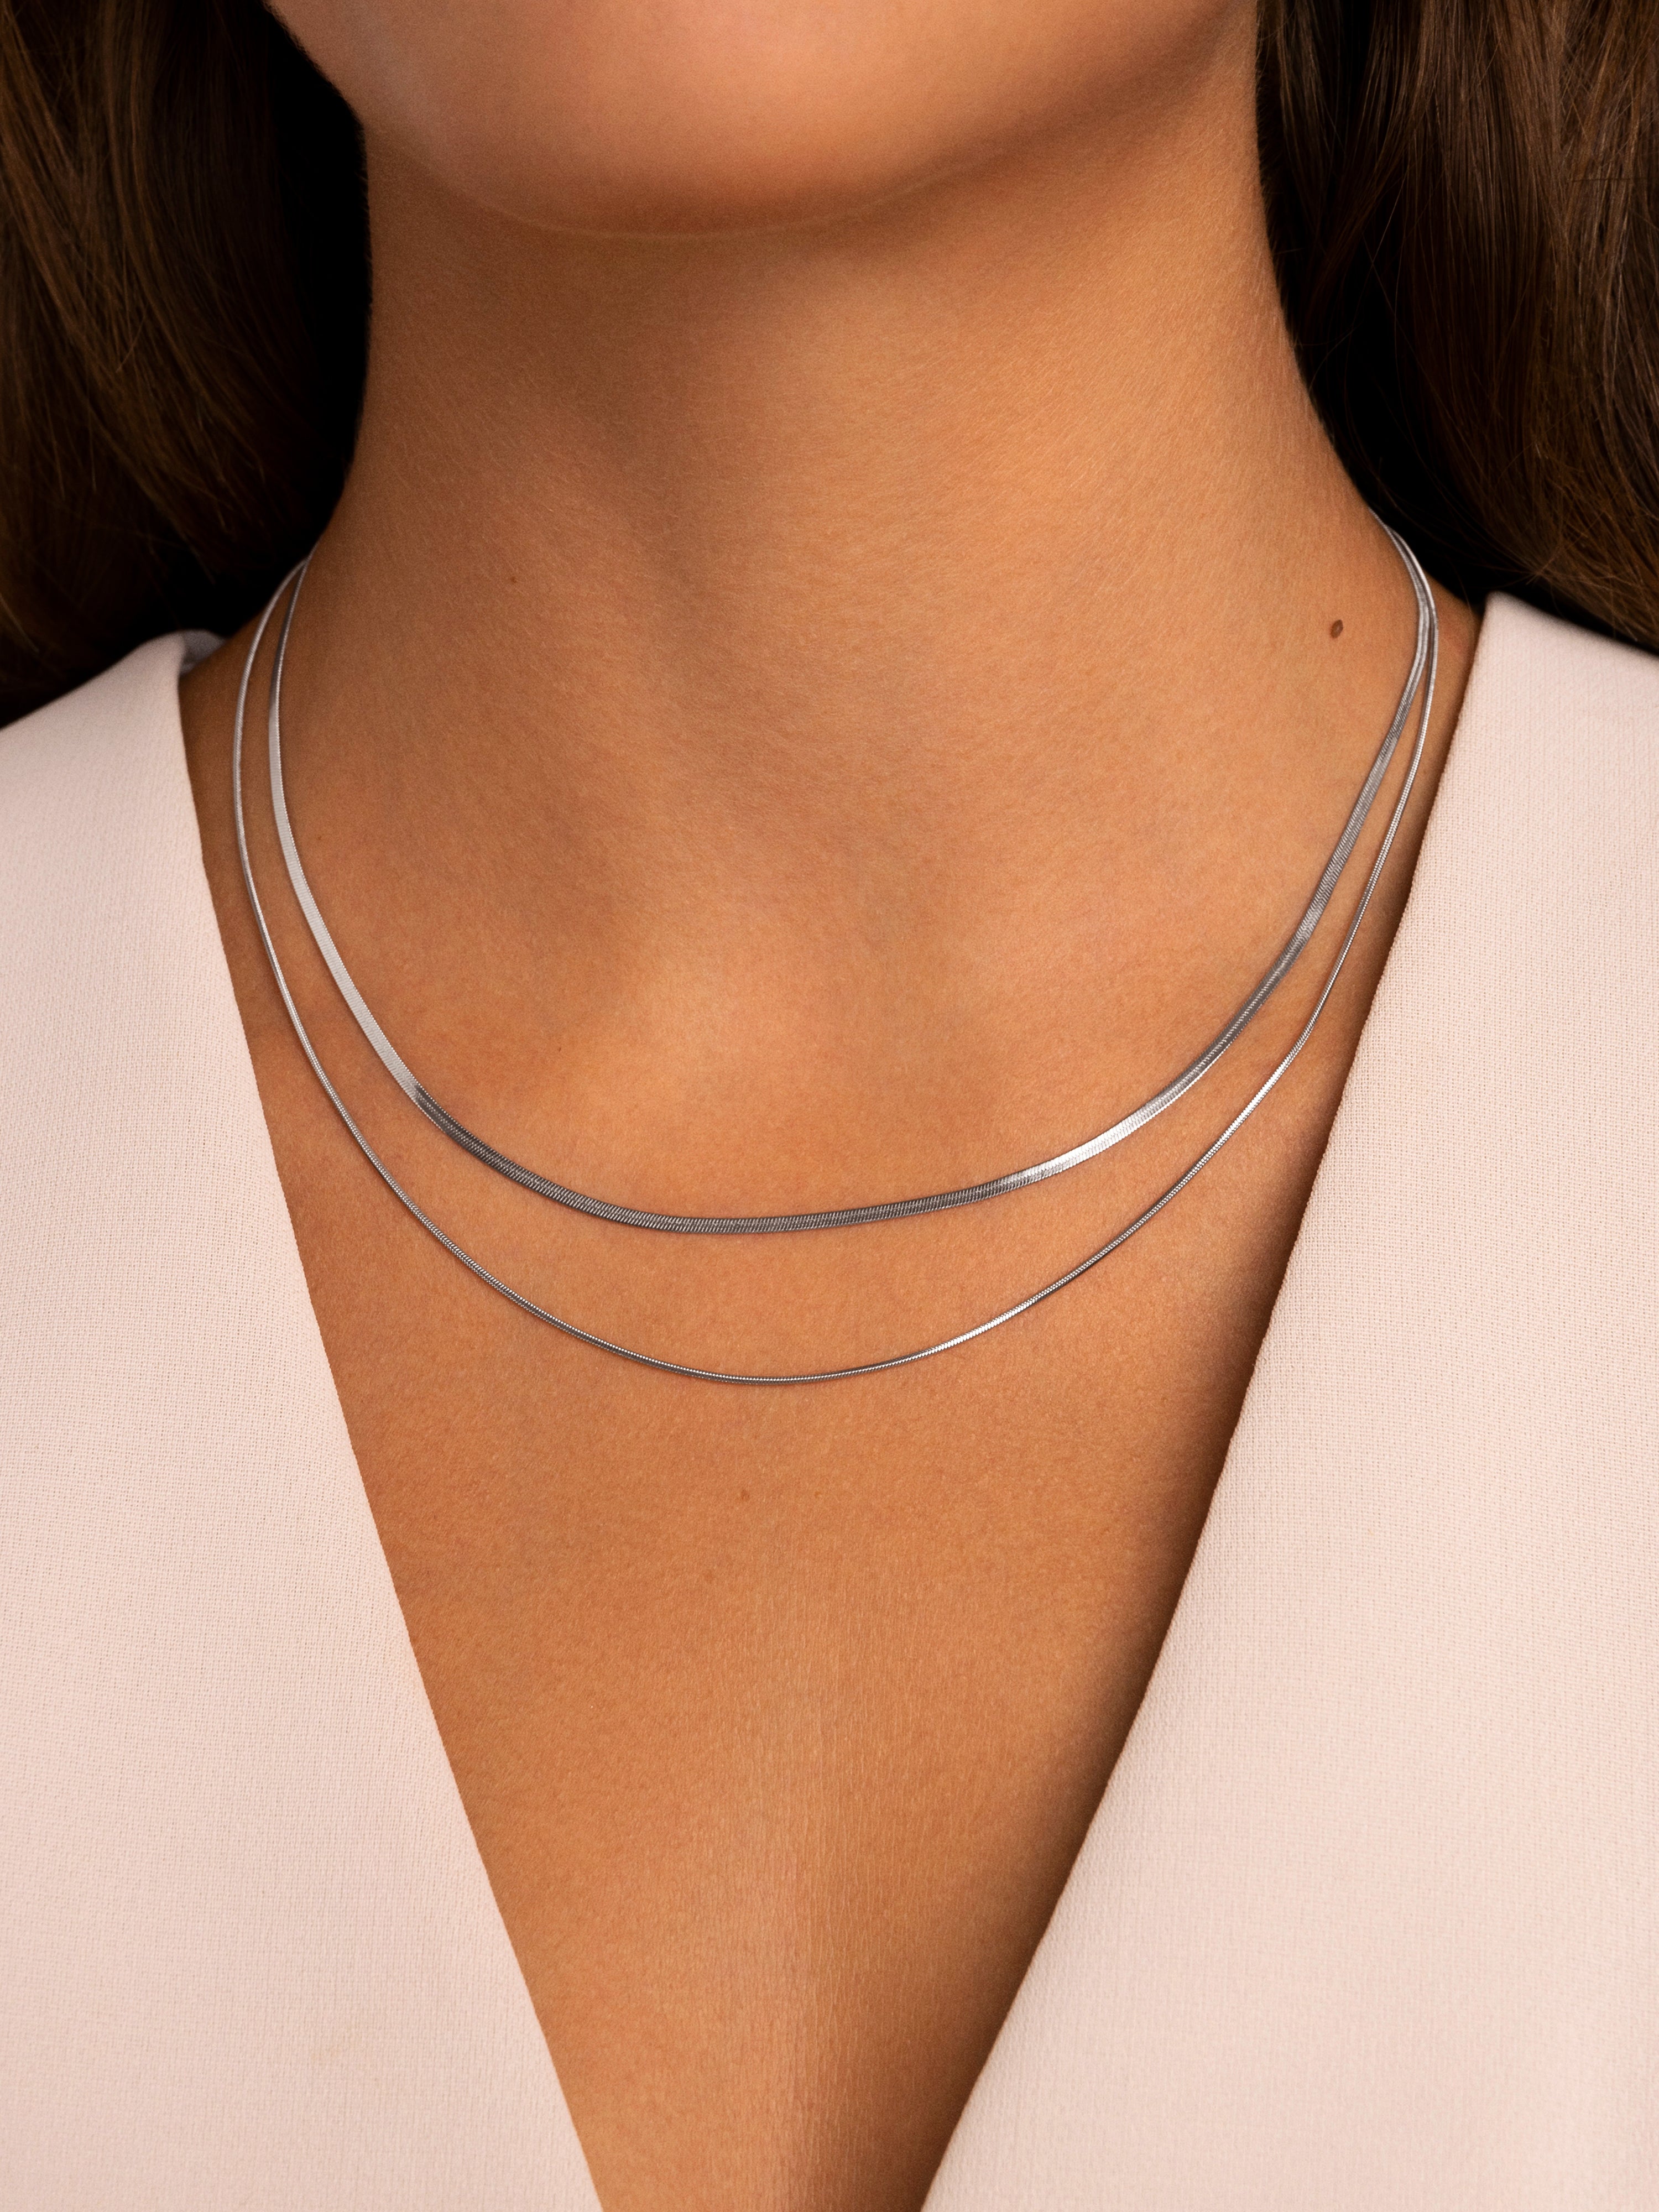 Double Lisse Tail Stainless Steel Necklace